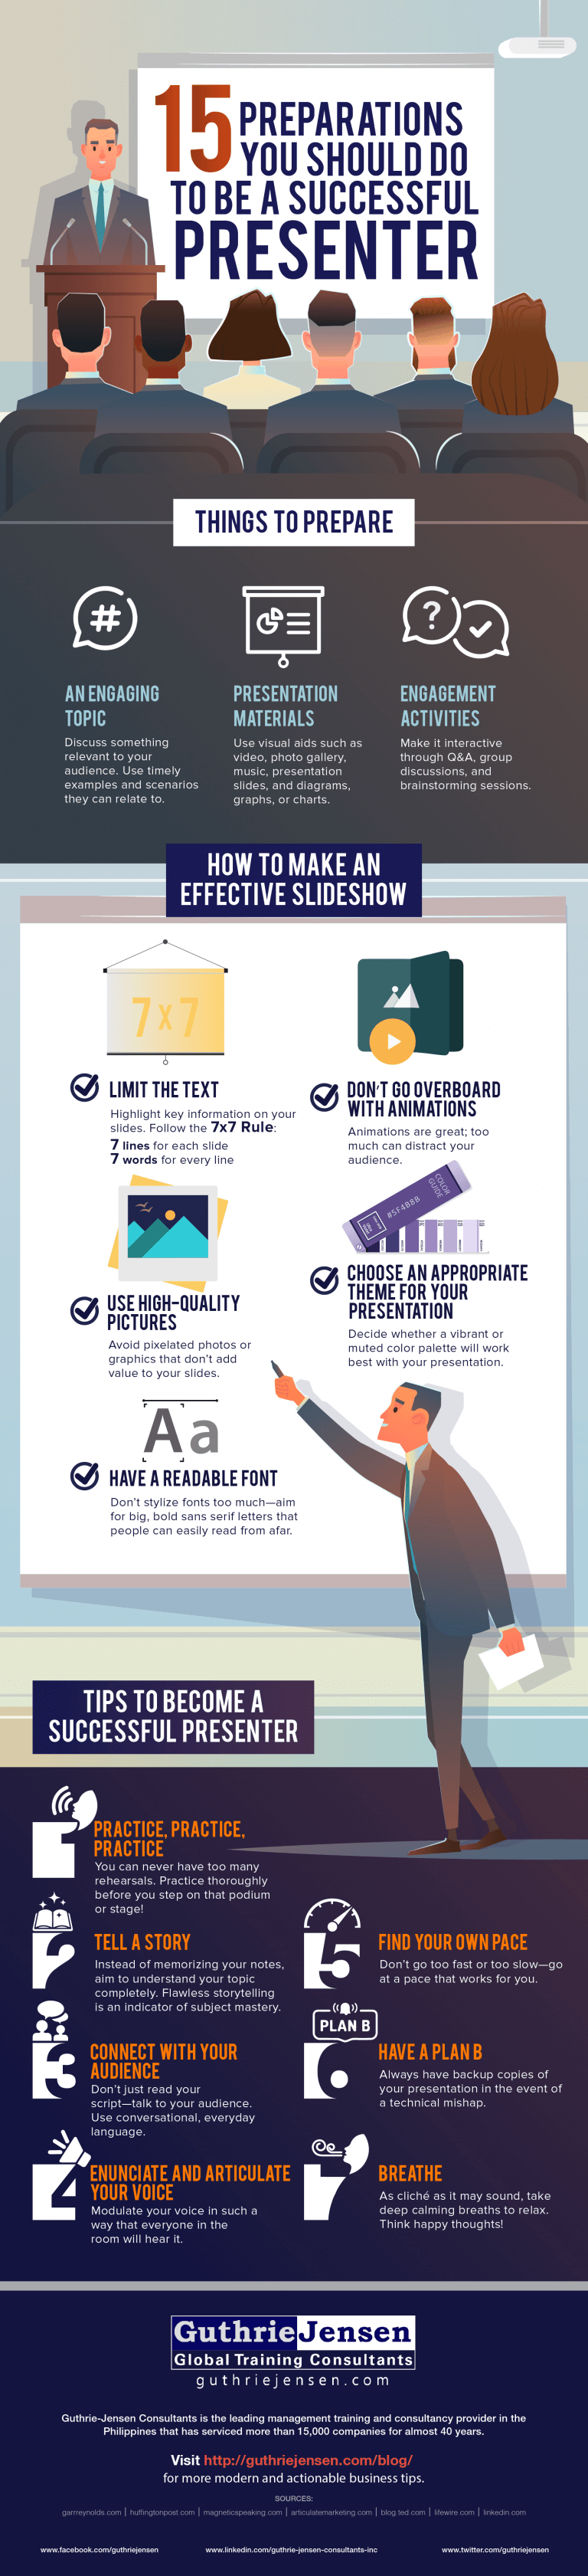 15 Preparations You Should Do to Become a Successful Presenter